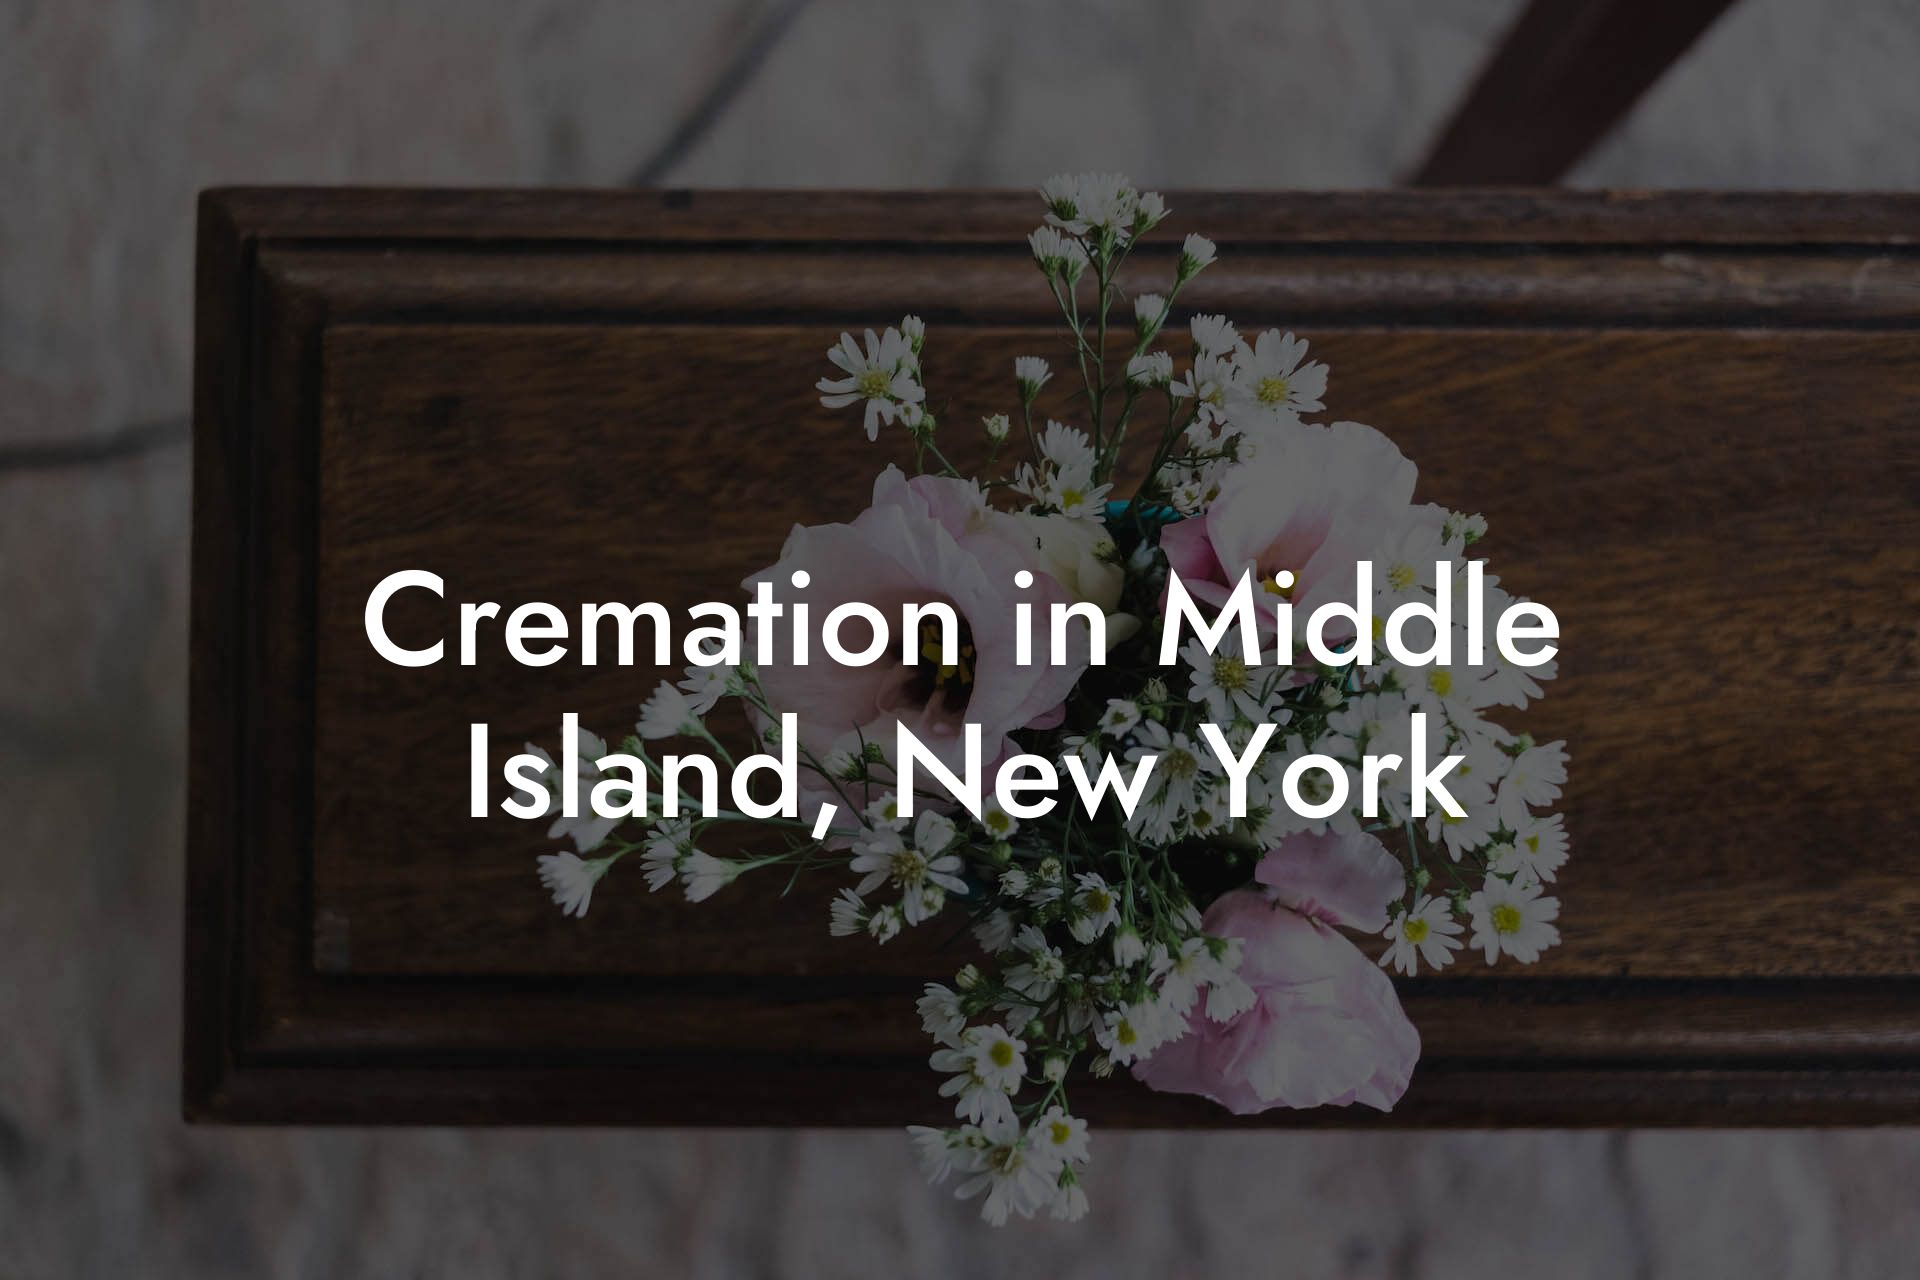 Cremation in Middle Island, New York